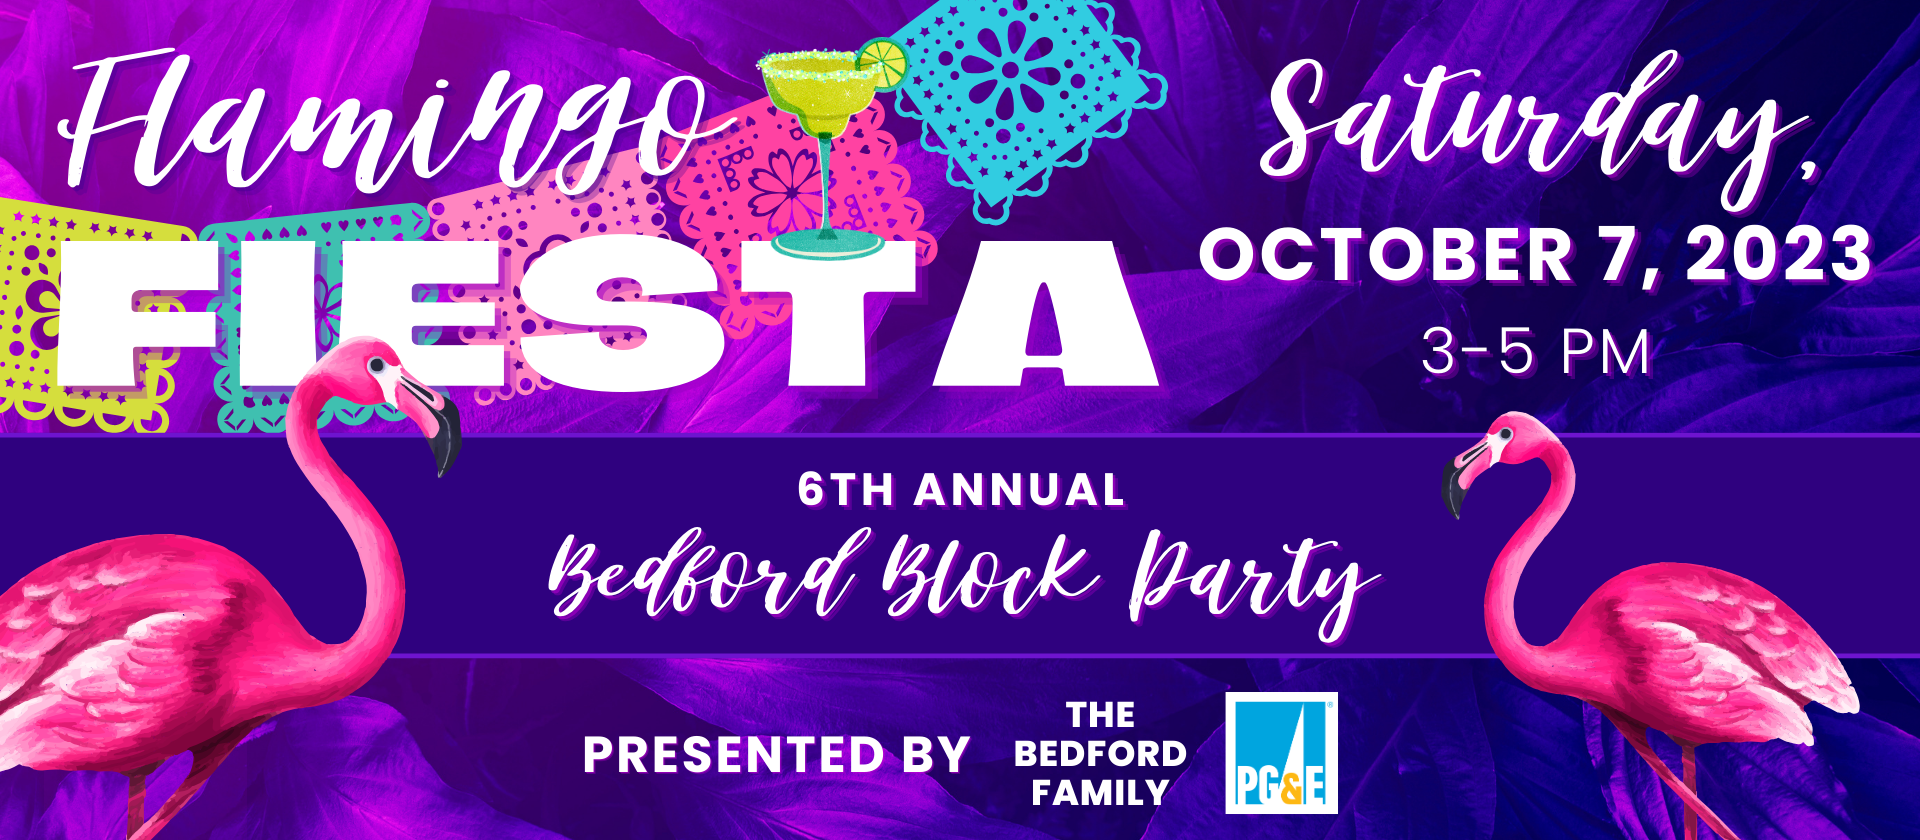 Our 6th Annual Bedford Block Party took place on Saturday, October 7, 2023 from 3-5 PM in Antioch, CA.